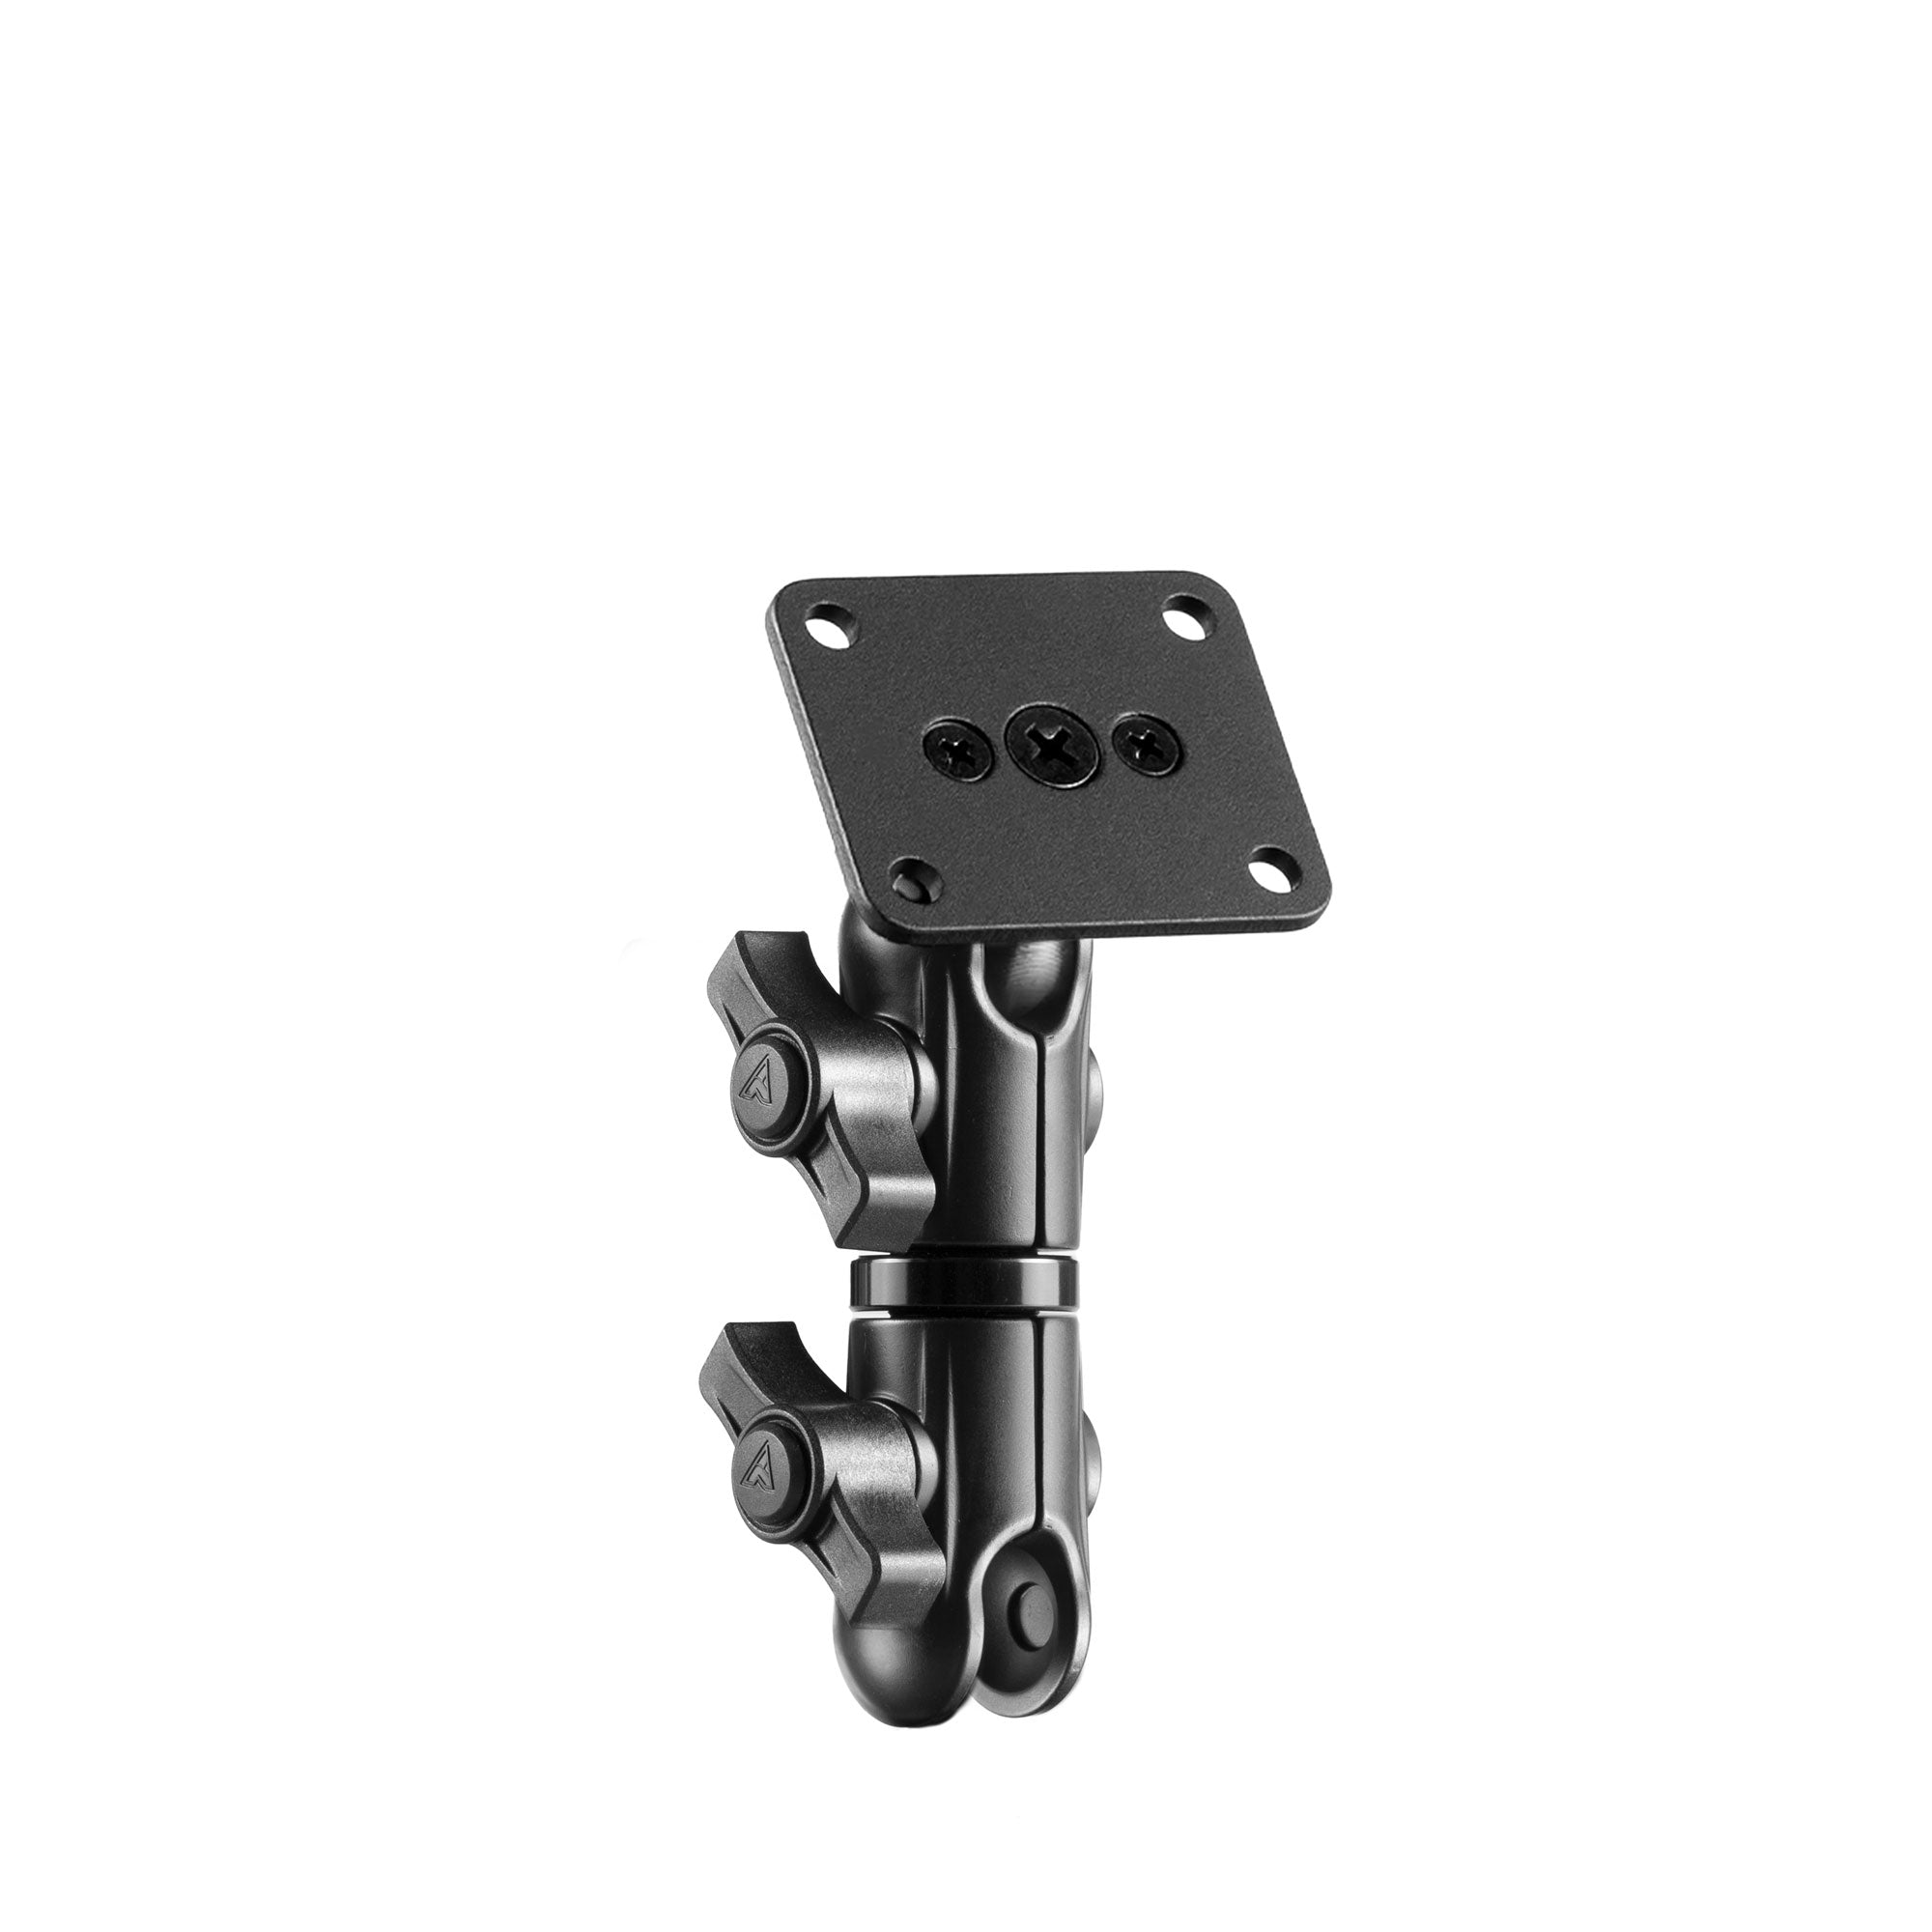 20 Series™ | 3.5" Arm | AMPS Holder